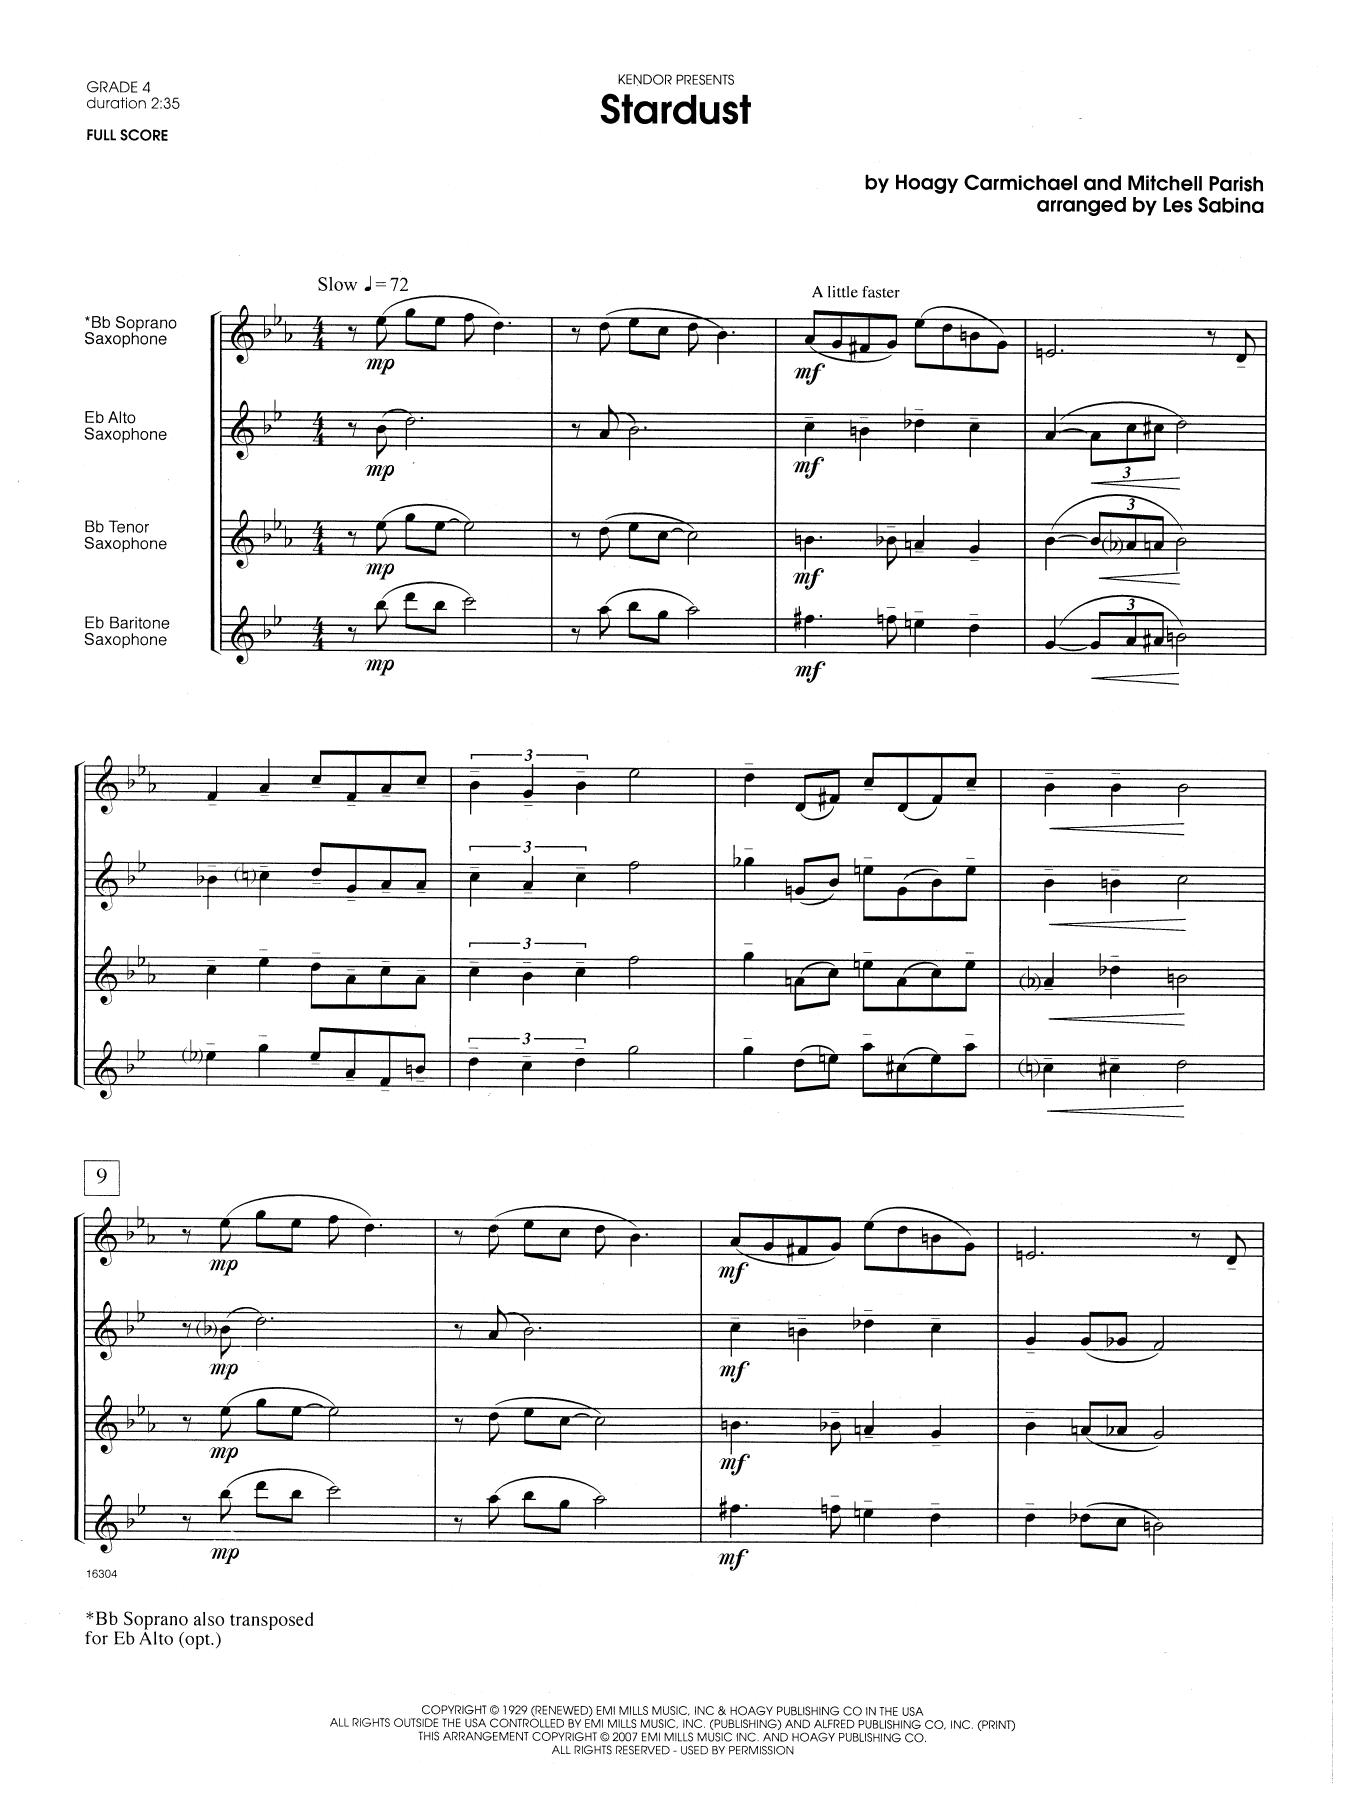 Les Sabina Stardust - Full Score sheet music notes and chords. Download Printable PDF.